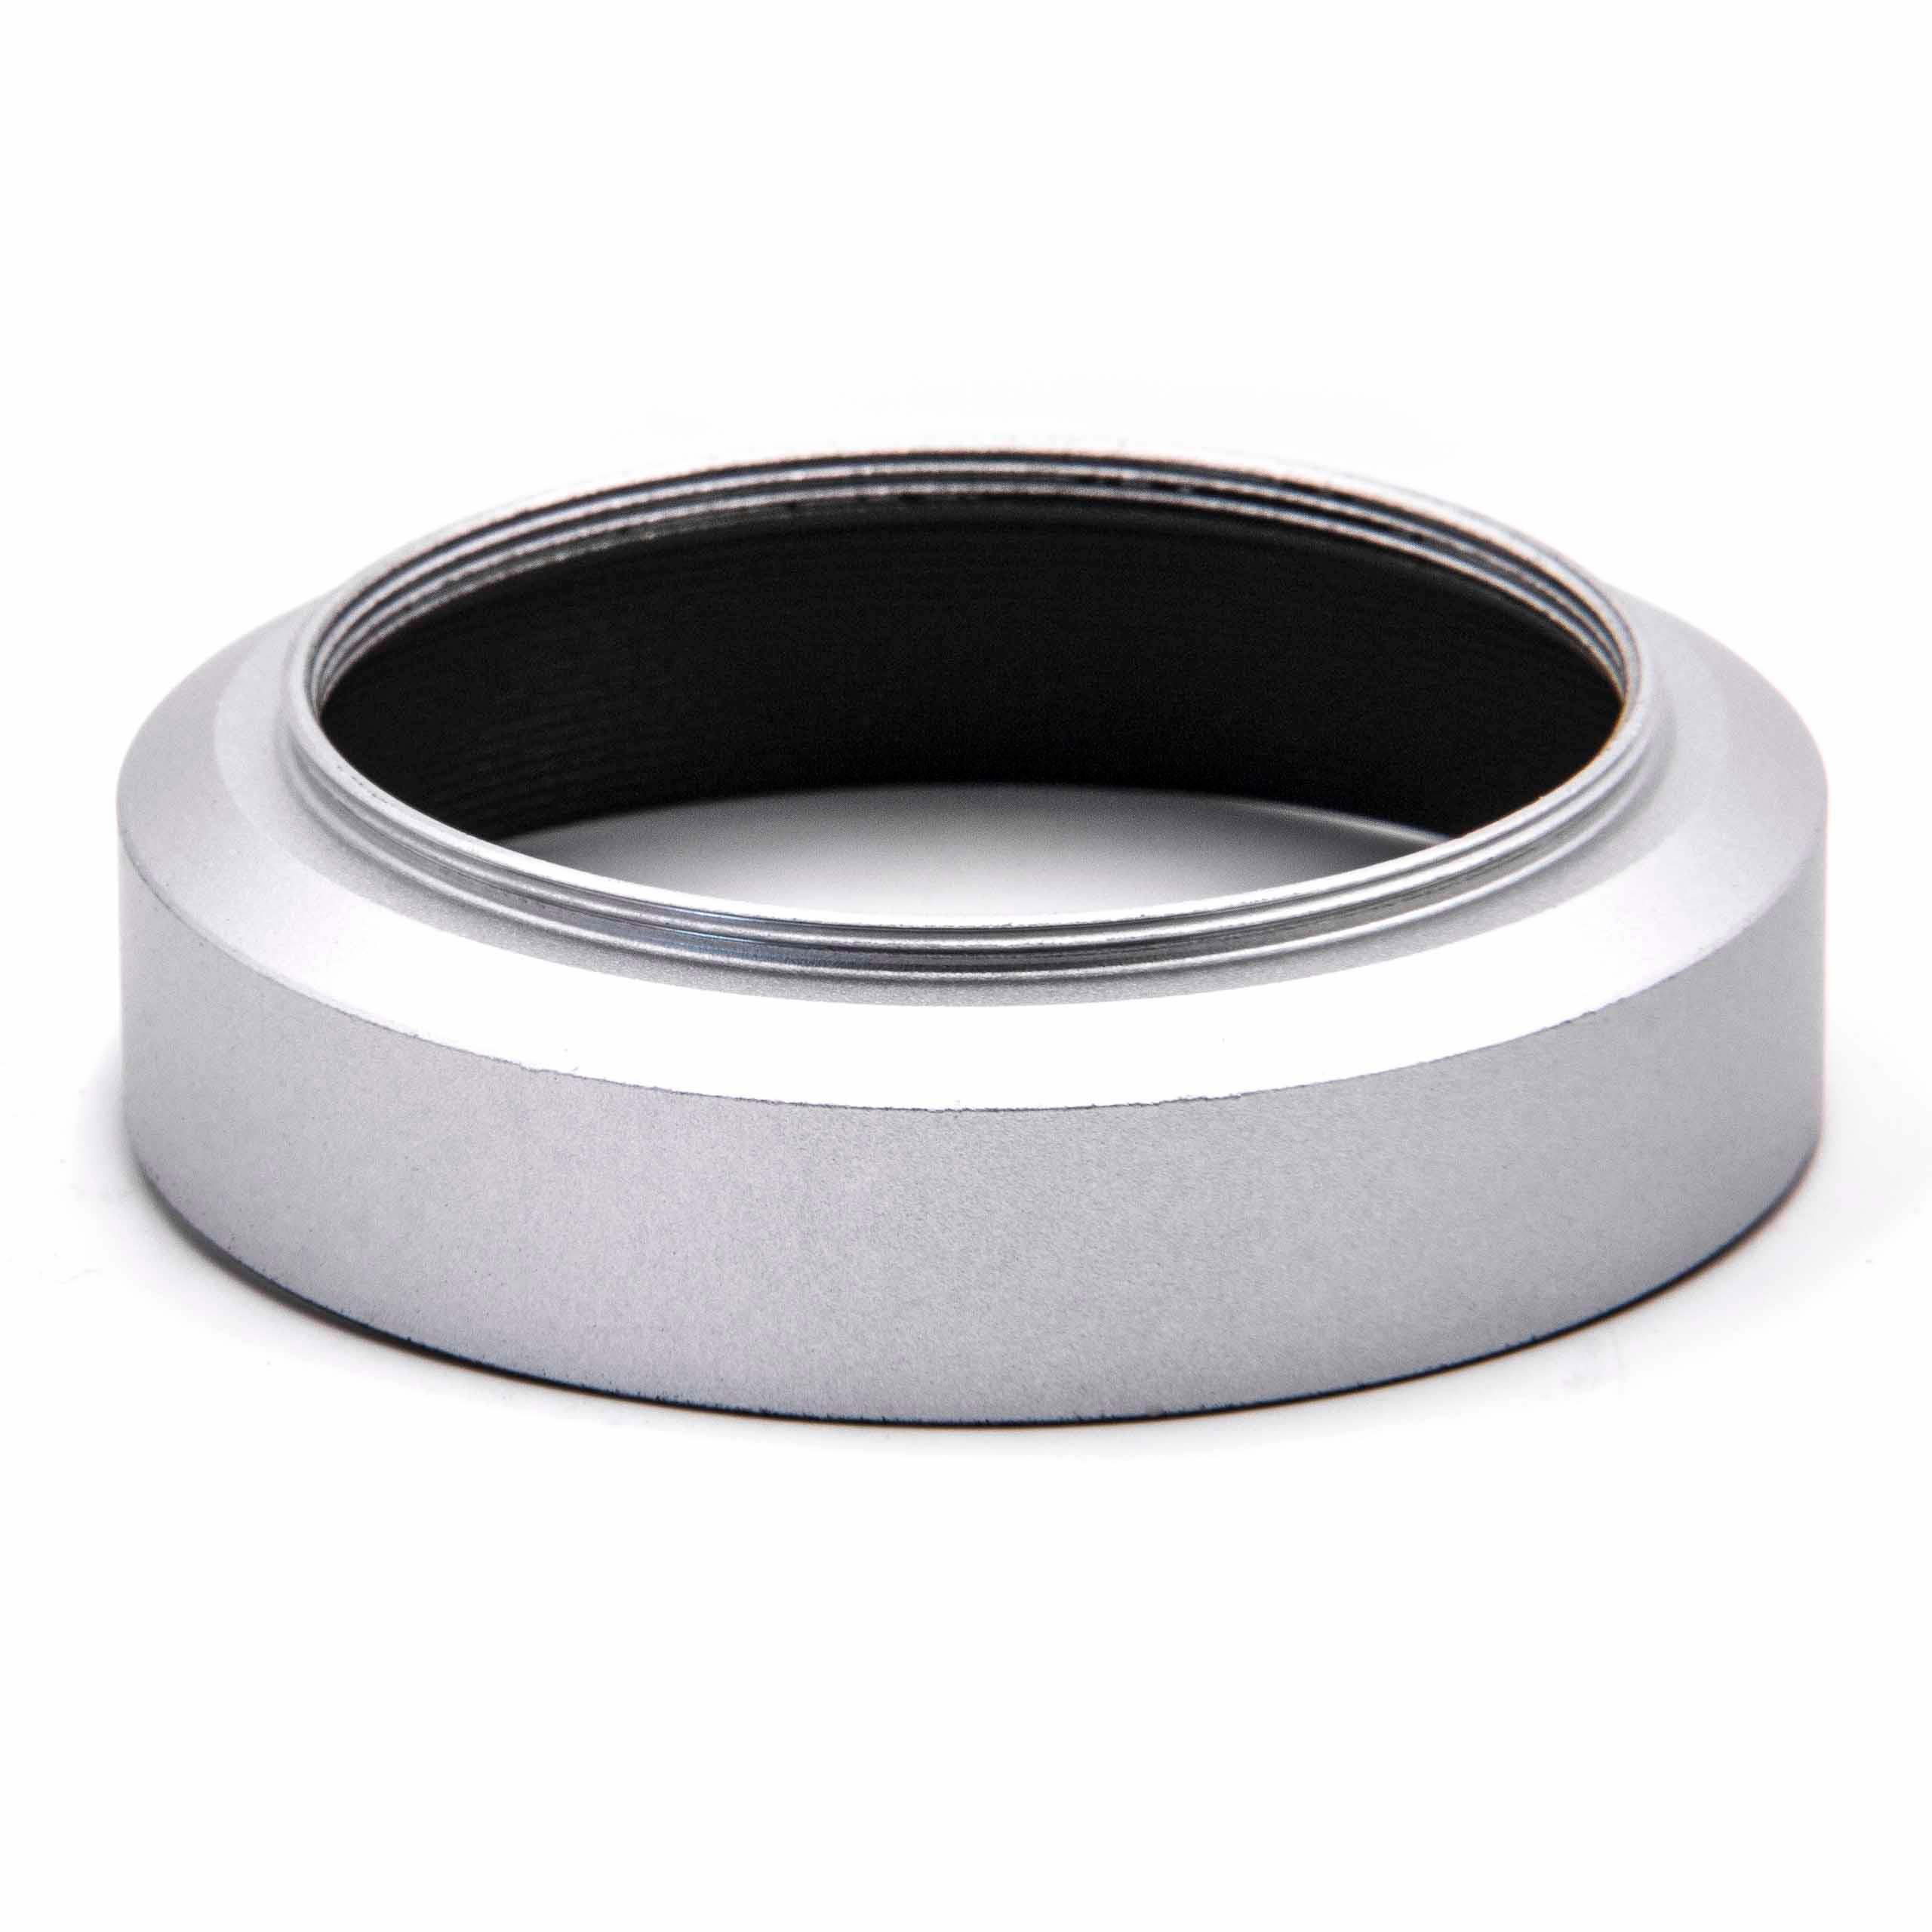 Lens Hood as Replacement for Contax Lens GG-2